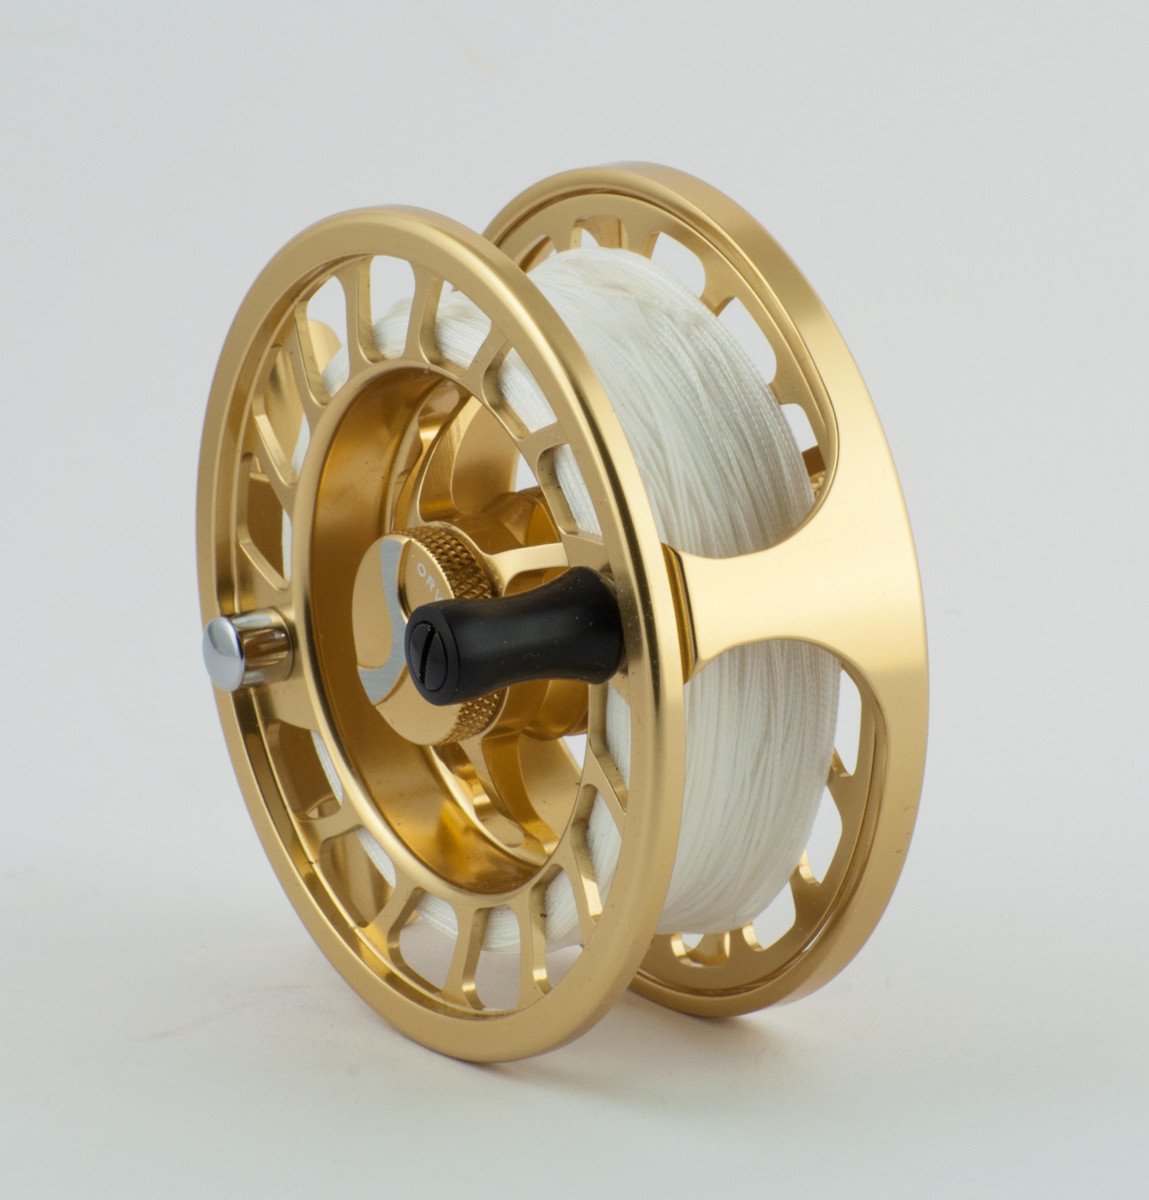 Orvis Mirage Fly Reel Gold VI #11-13 - リール